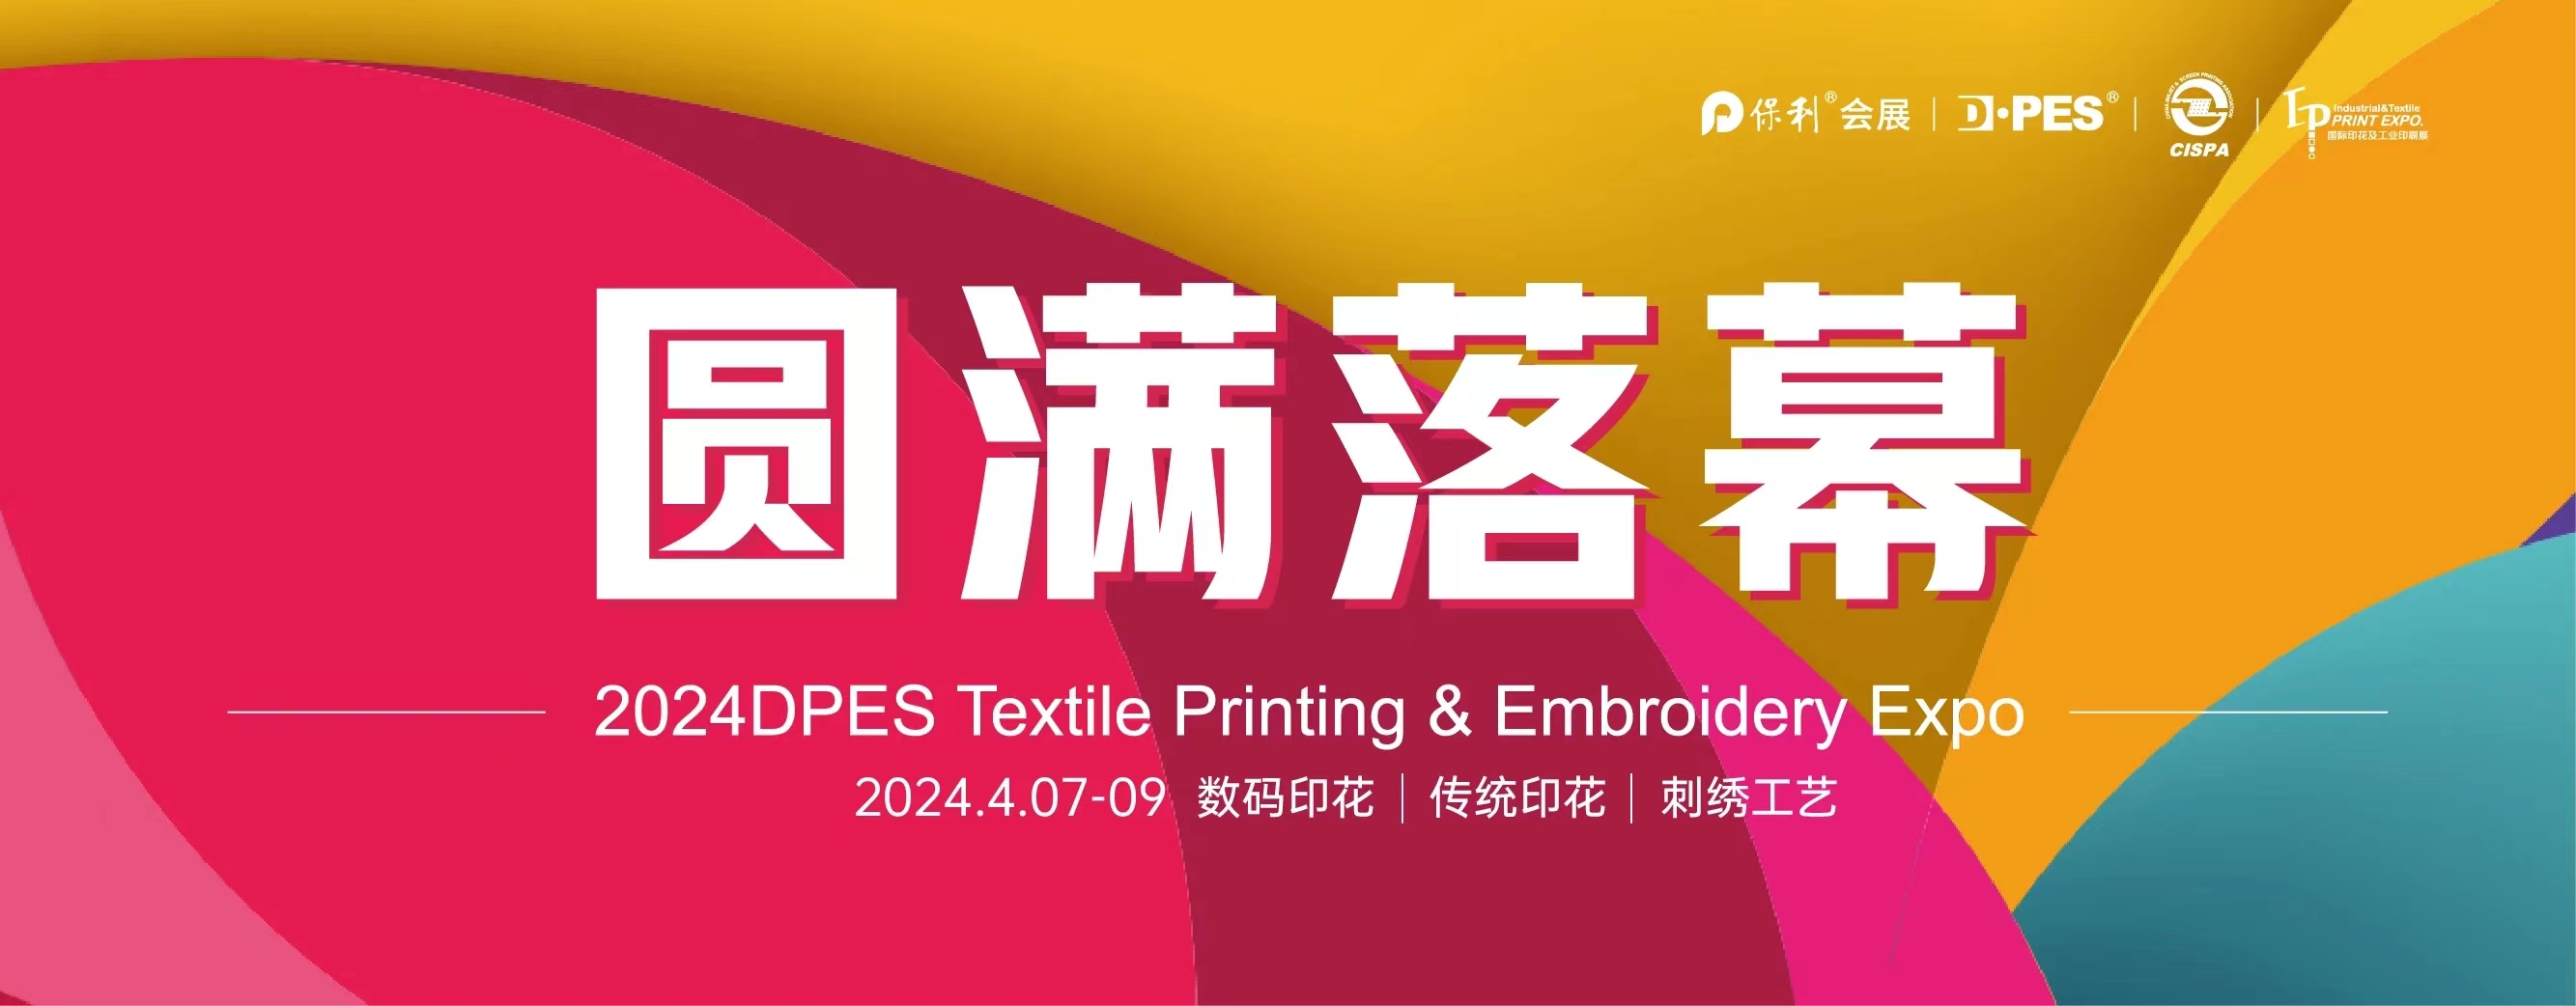 Show Report of DPES Textile Printing & Embroidery Expo 2024